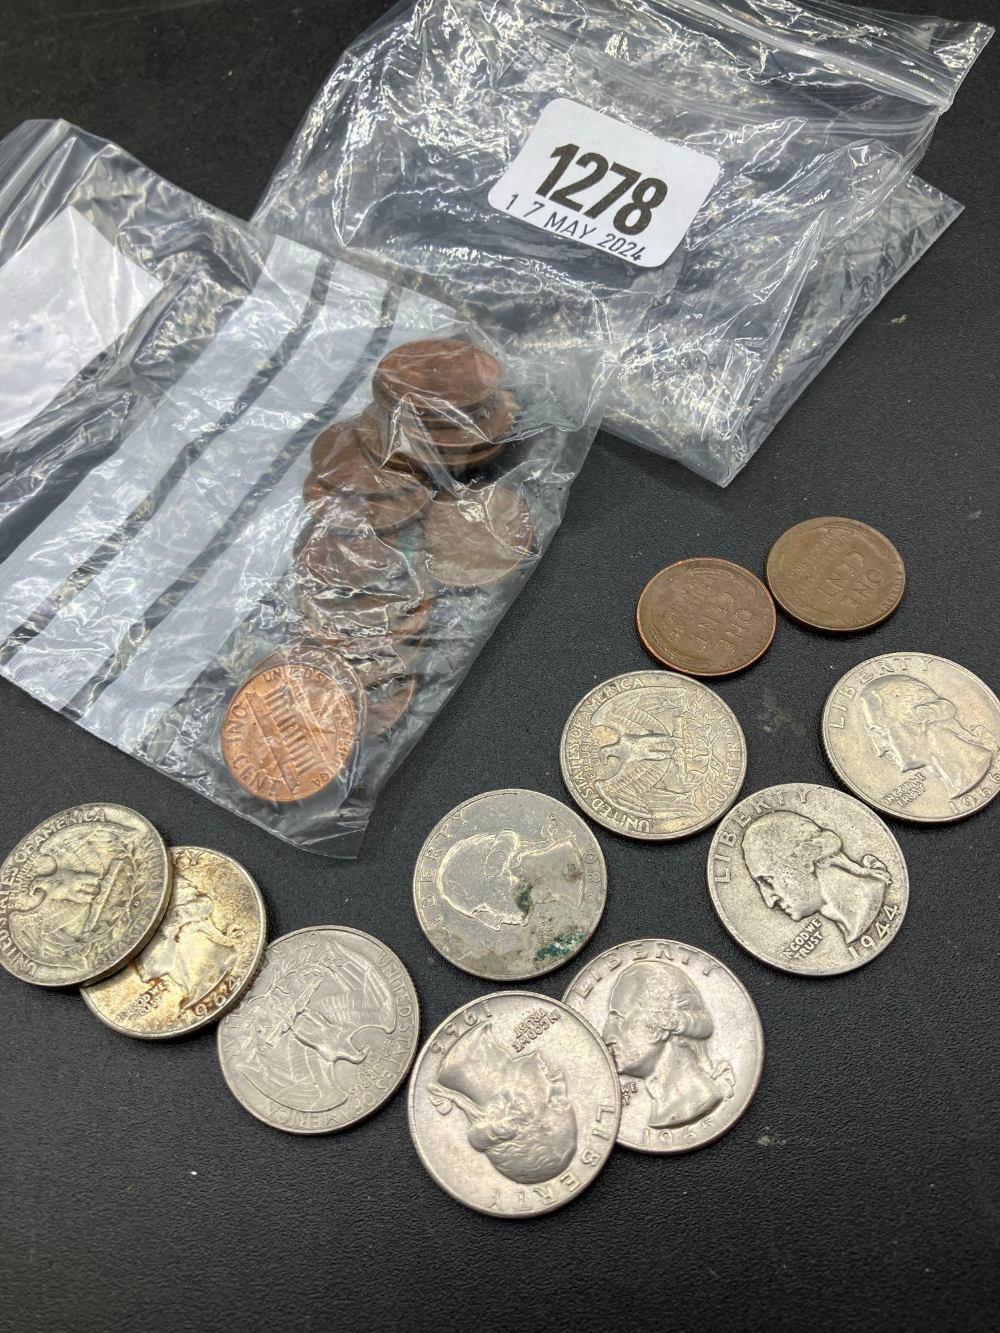 USA quarter dollars, one lot of silver coinage and one bag of one cent coins